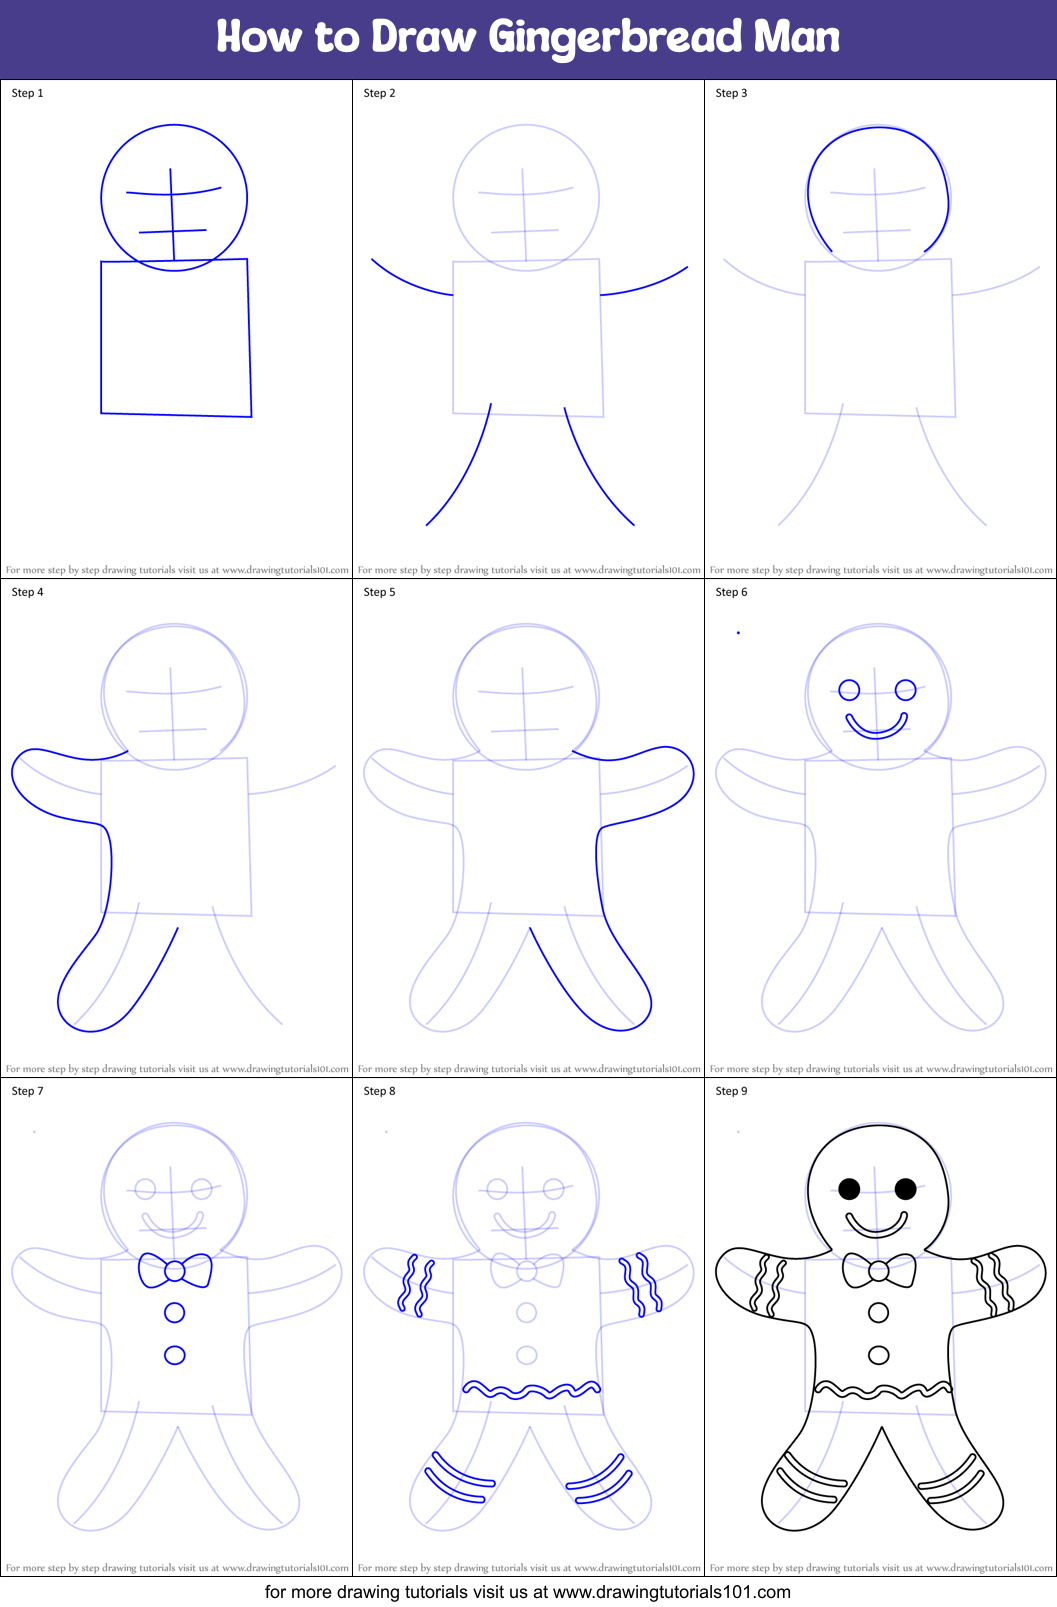 How to Draw Gingerbread Man printable step by step drawing sheet